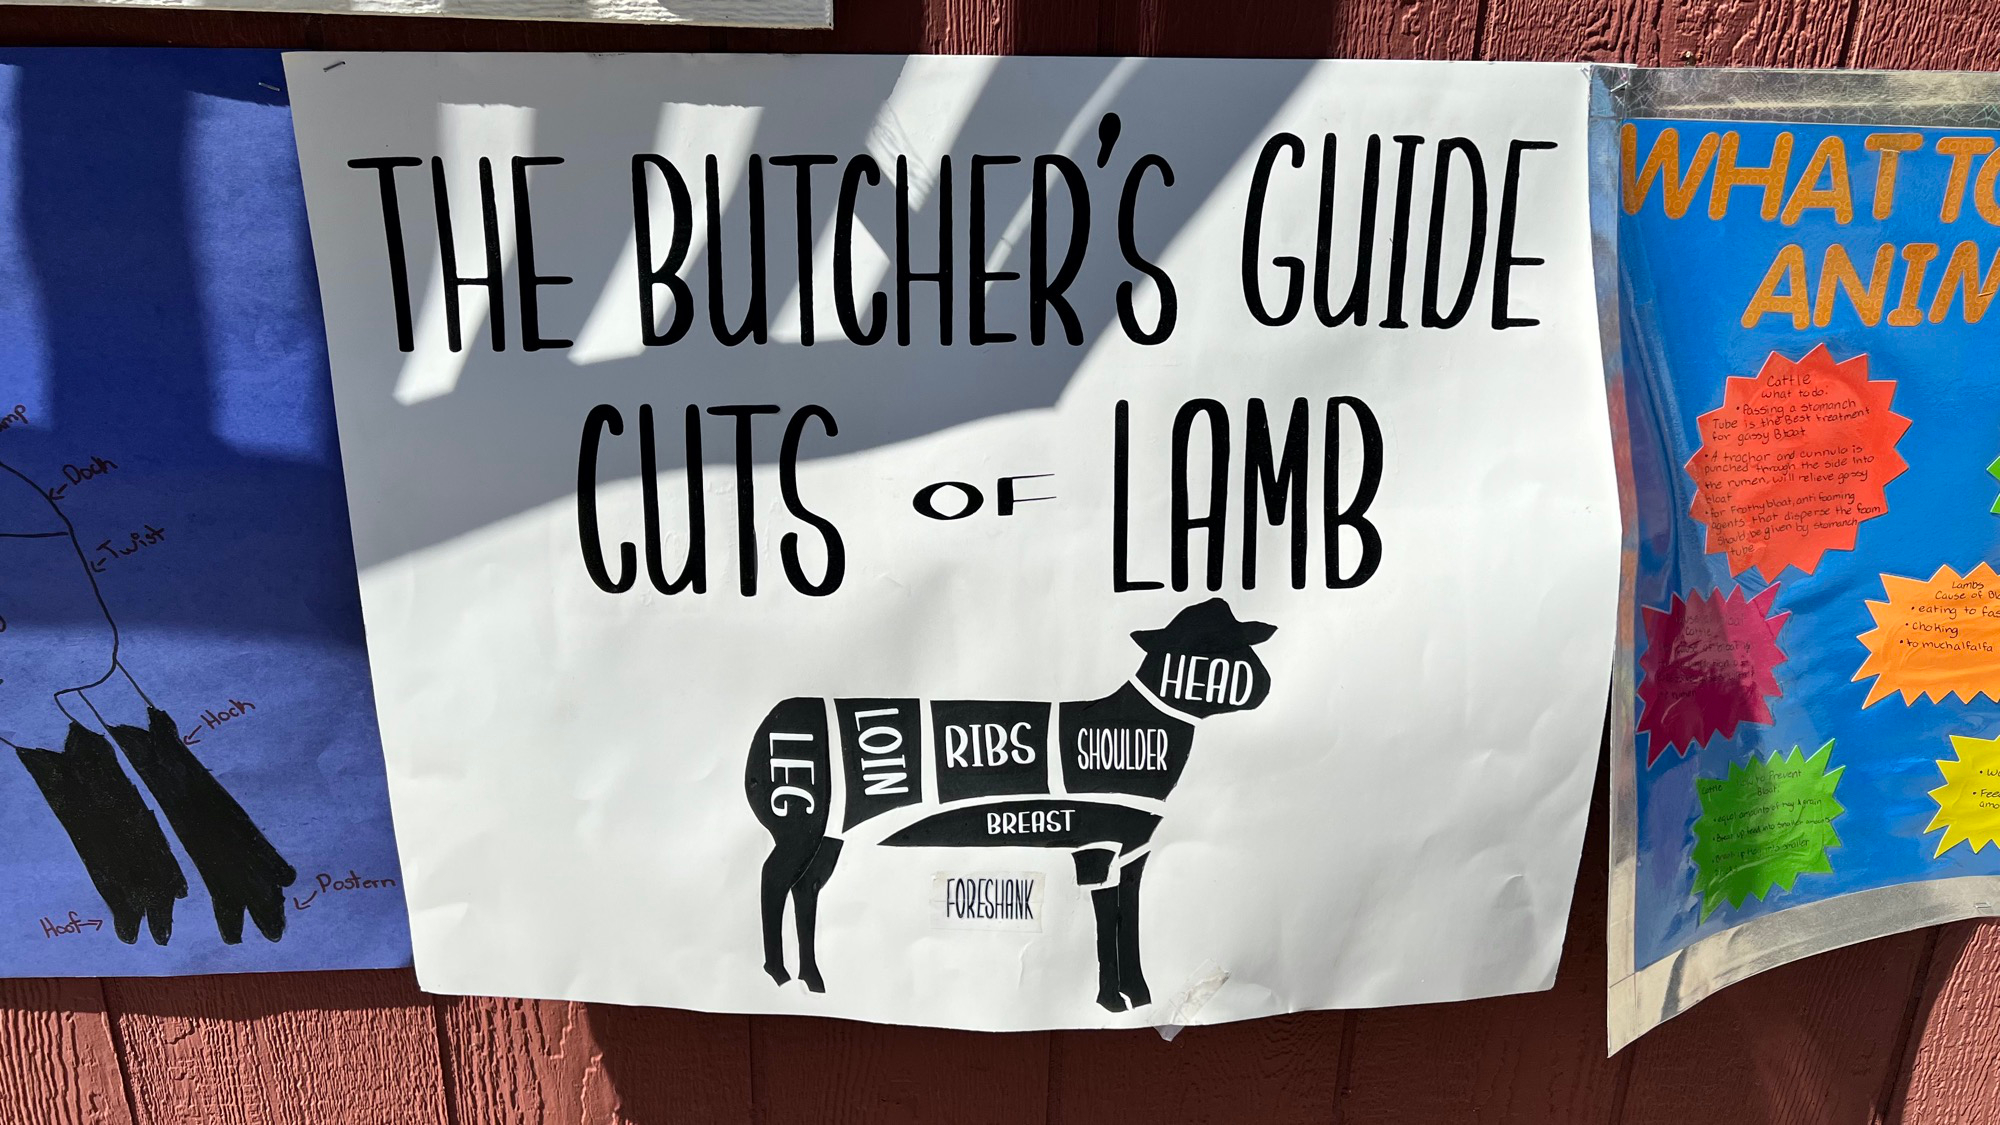 The Butcher's Guide Cuts of Lamb